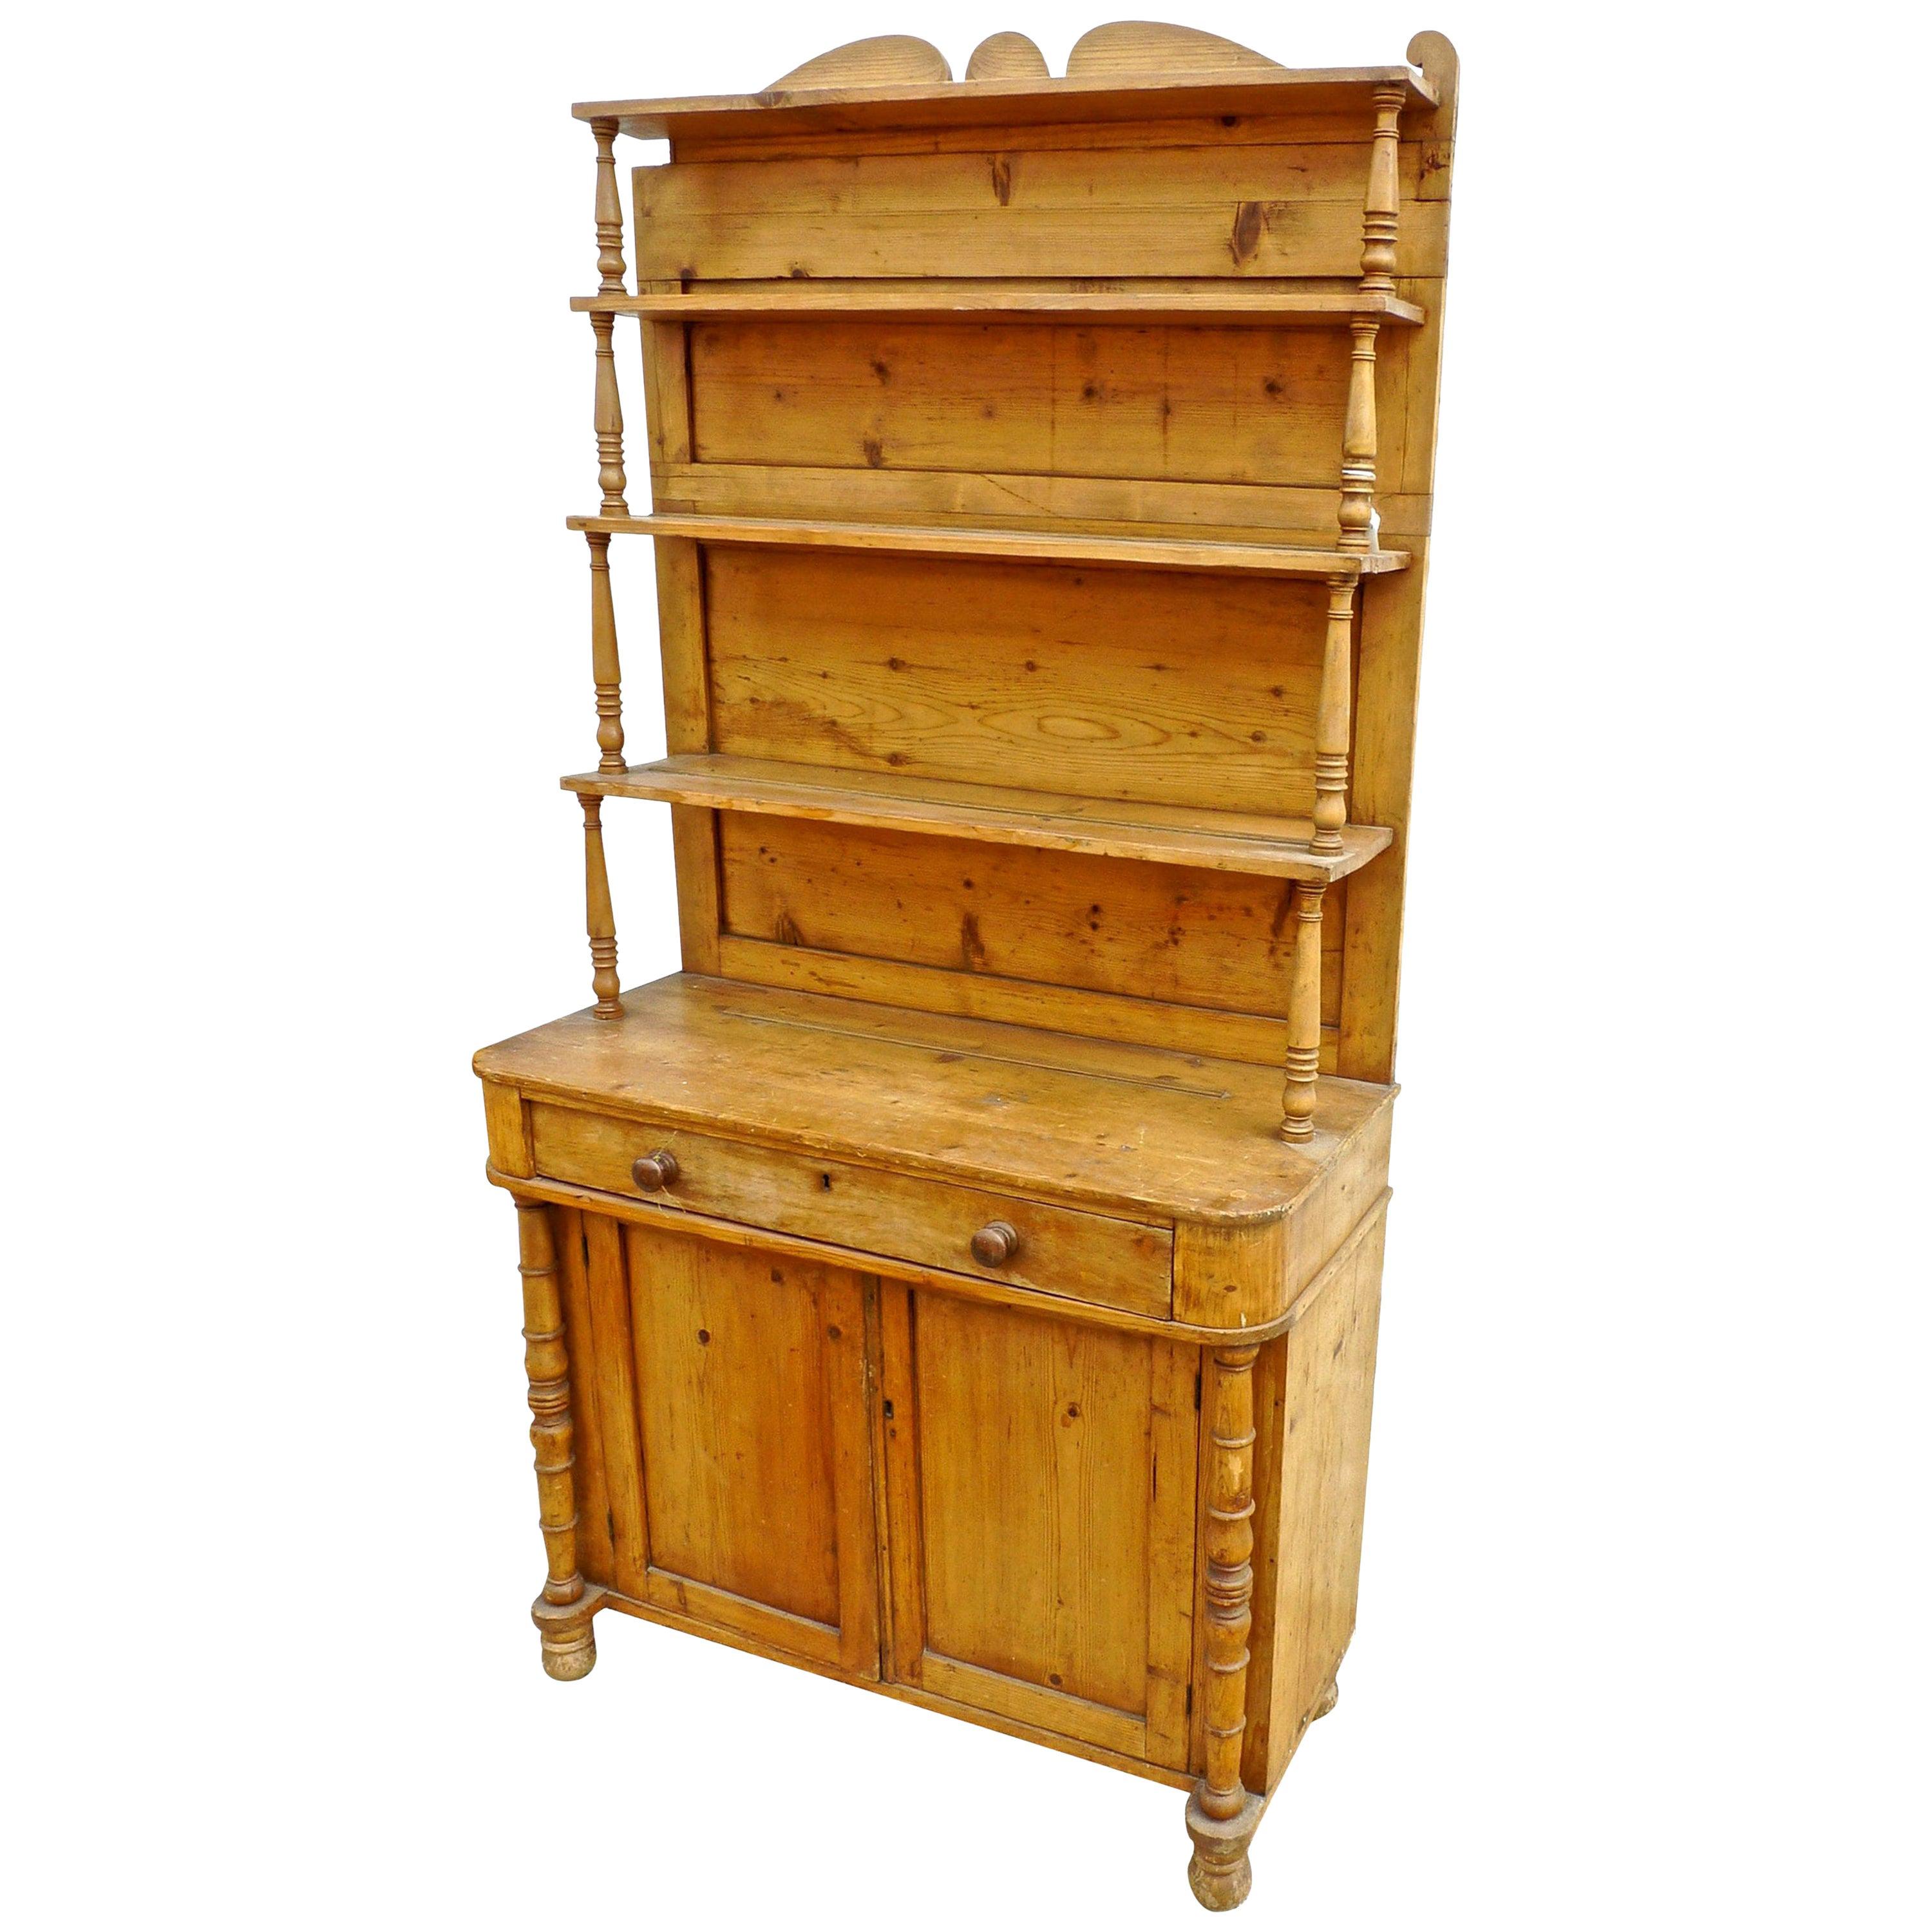 French Open Faced Country Dresser with 3 Shelves, 2 Doors and One-Drawer